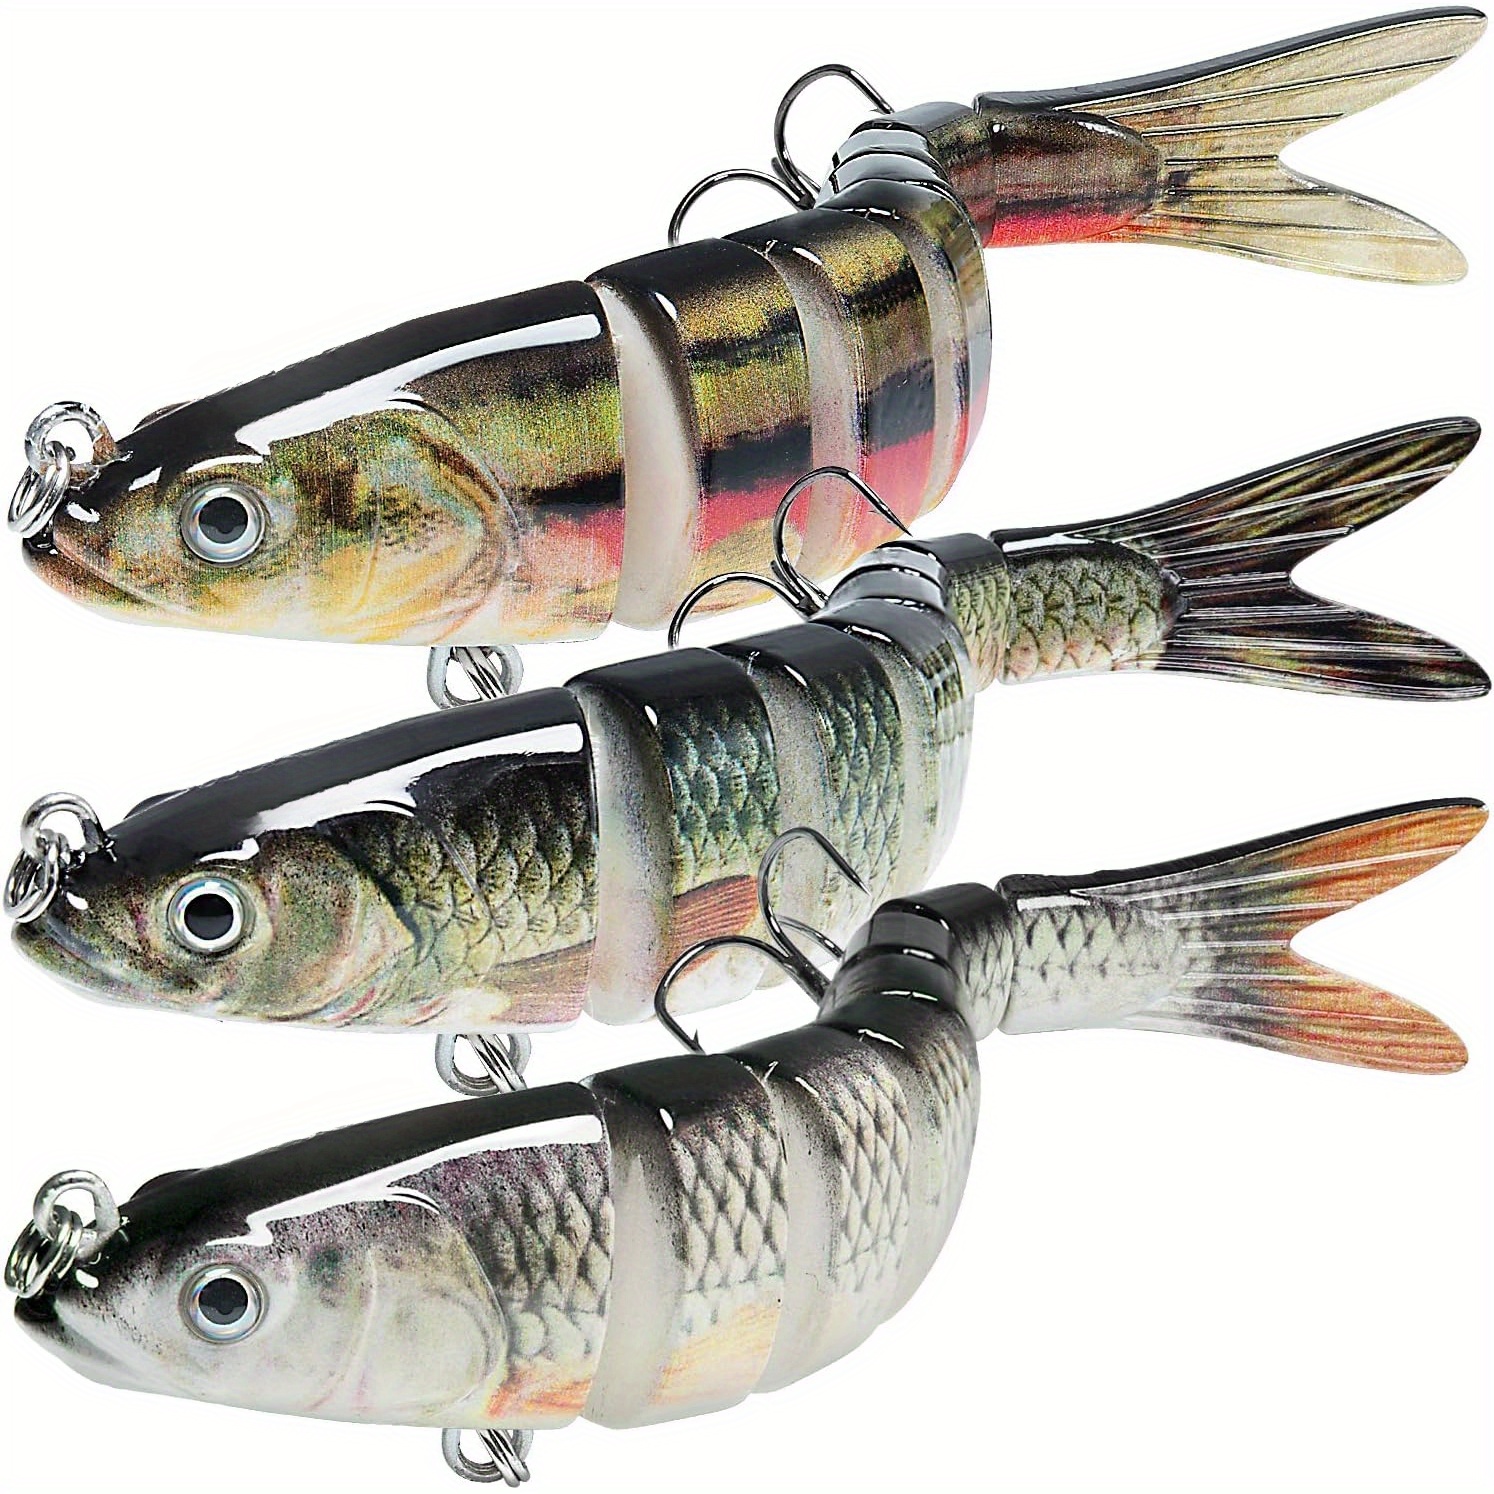 

Fishing Lures For Freshwater And Saltwater, Lifelike Swimbait For Bass Trout Crappie, Slow Sinking Bass Fishing Lure, Amazing Fishing Gifts For Men, Must-have For Family Fishing Gear